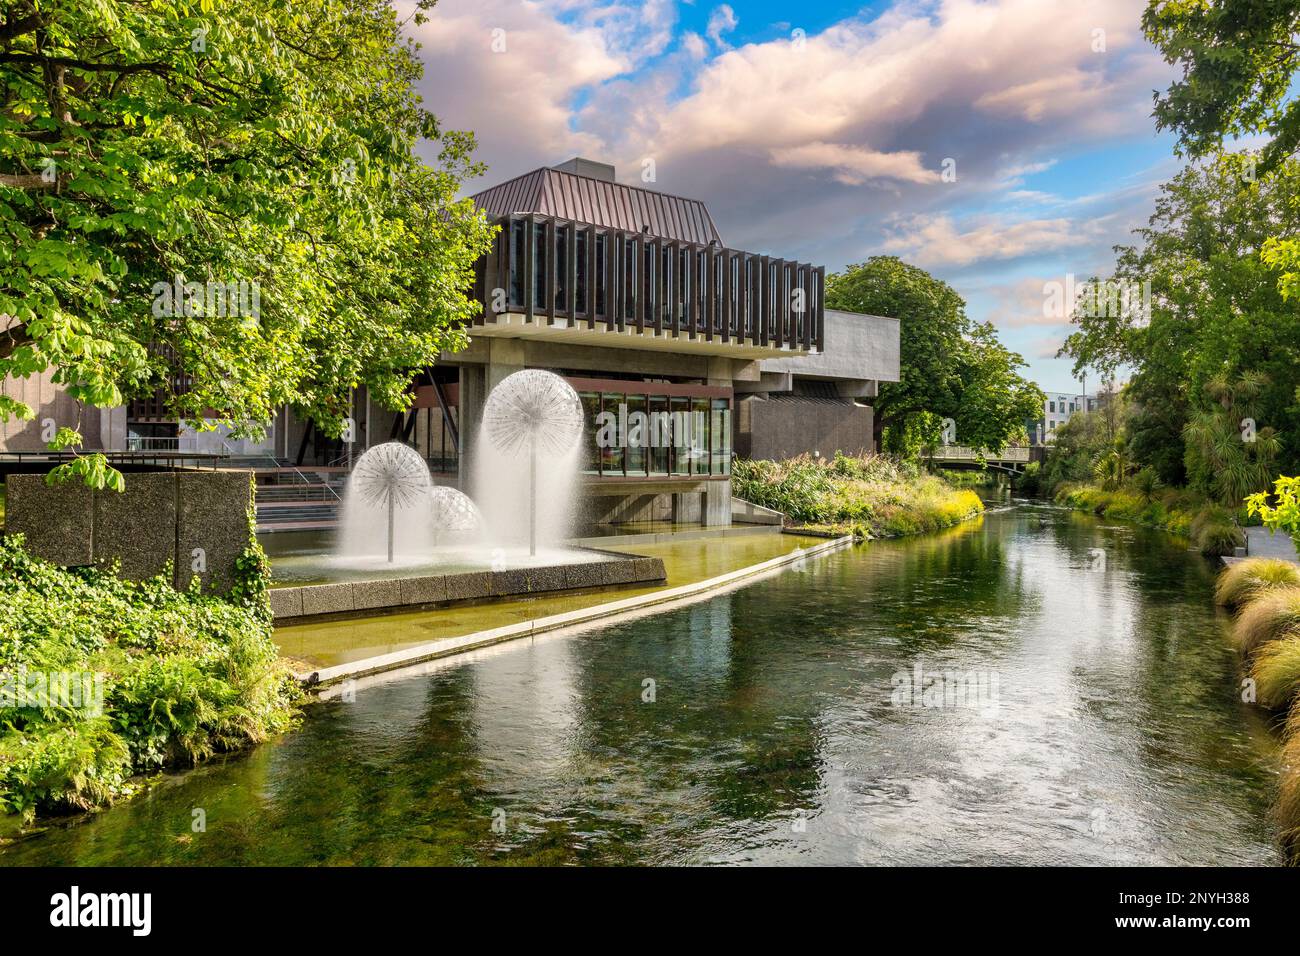 The Town Hall, the Ferrier Fountain and the Avon River, Christchurch, New Zealand Stock Photo